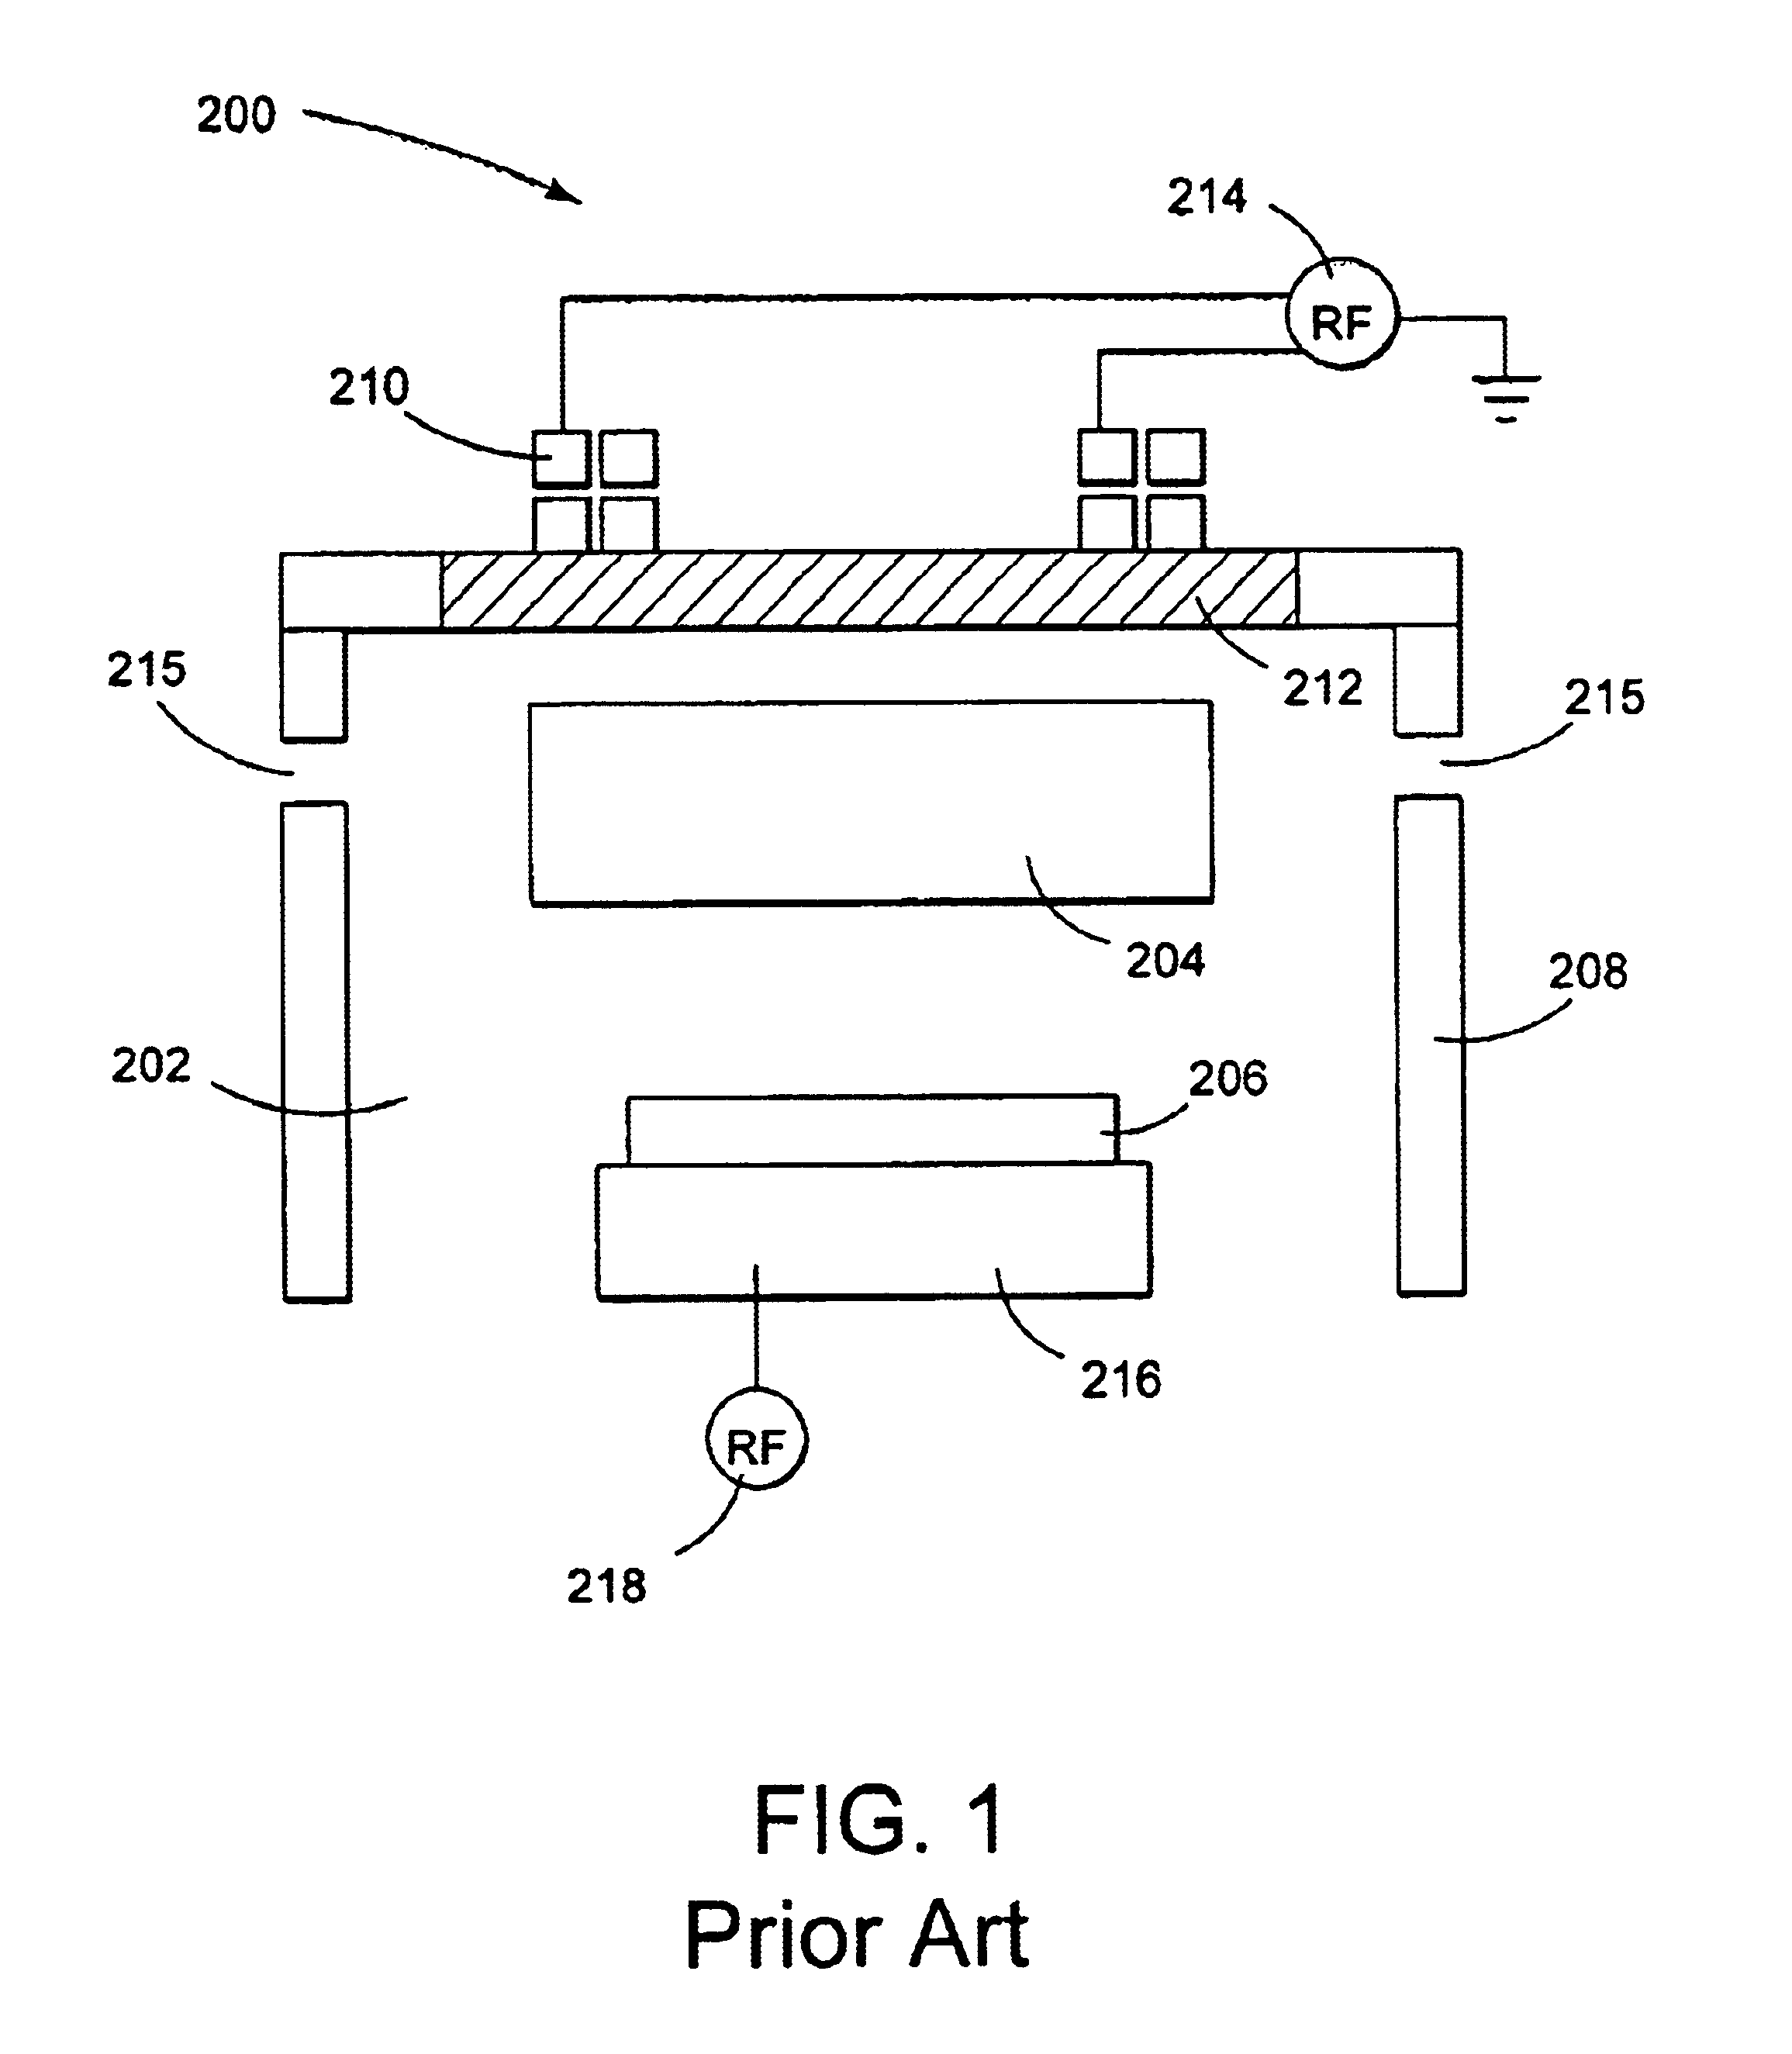 Method and apparatus for producing uniform processing rates